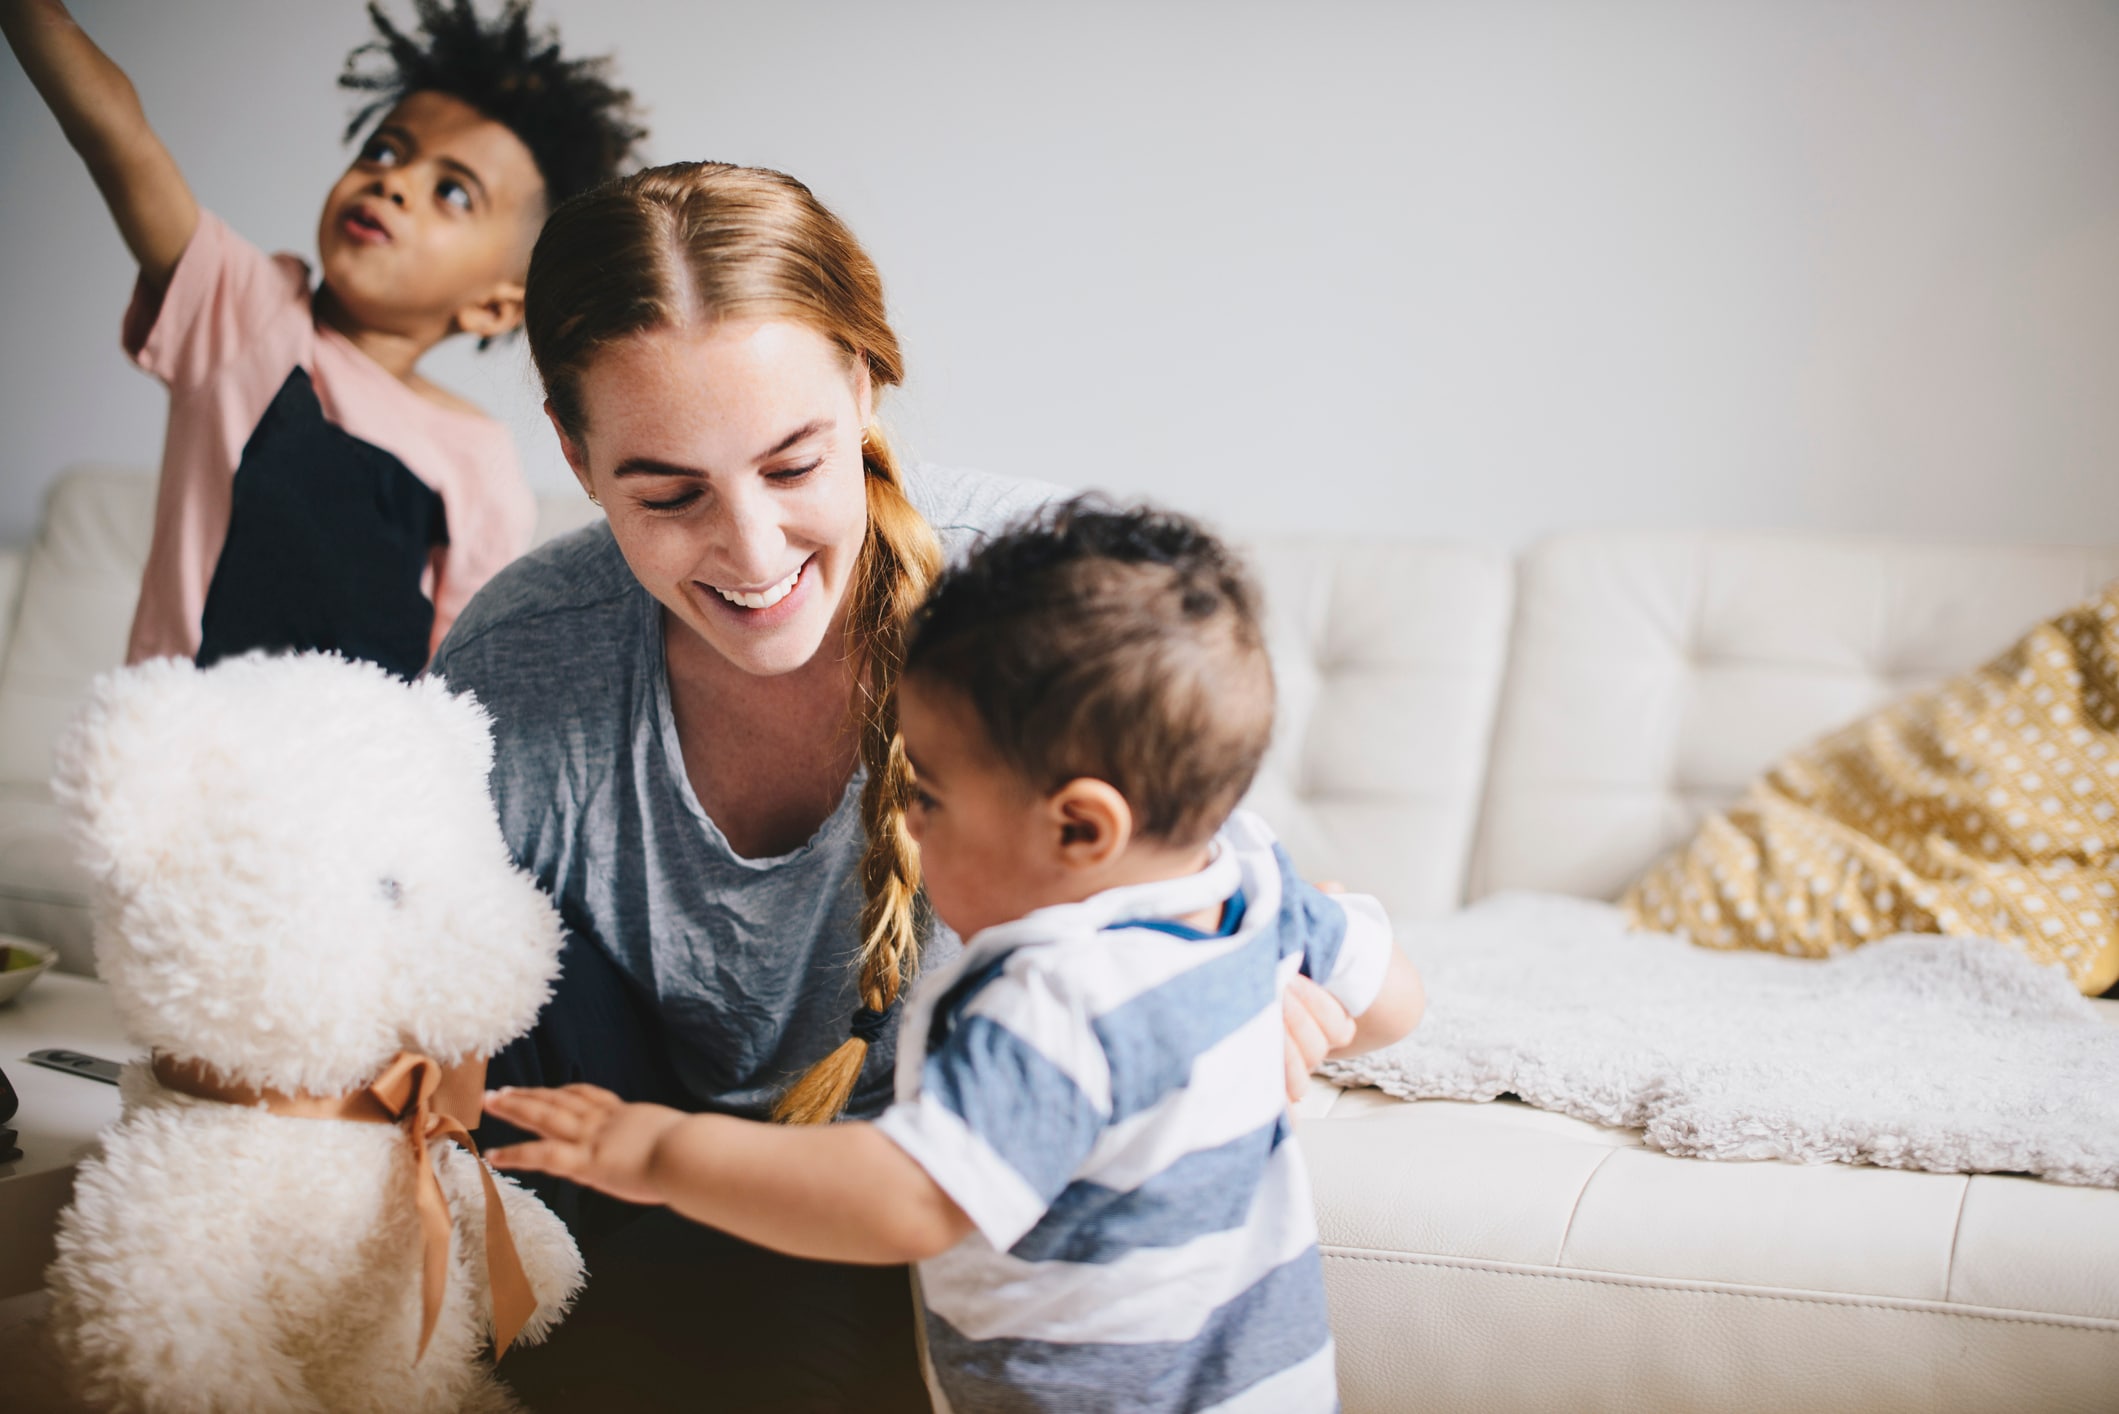 How to discuss bringing your own child to a nanny or babysitting job